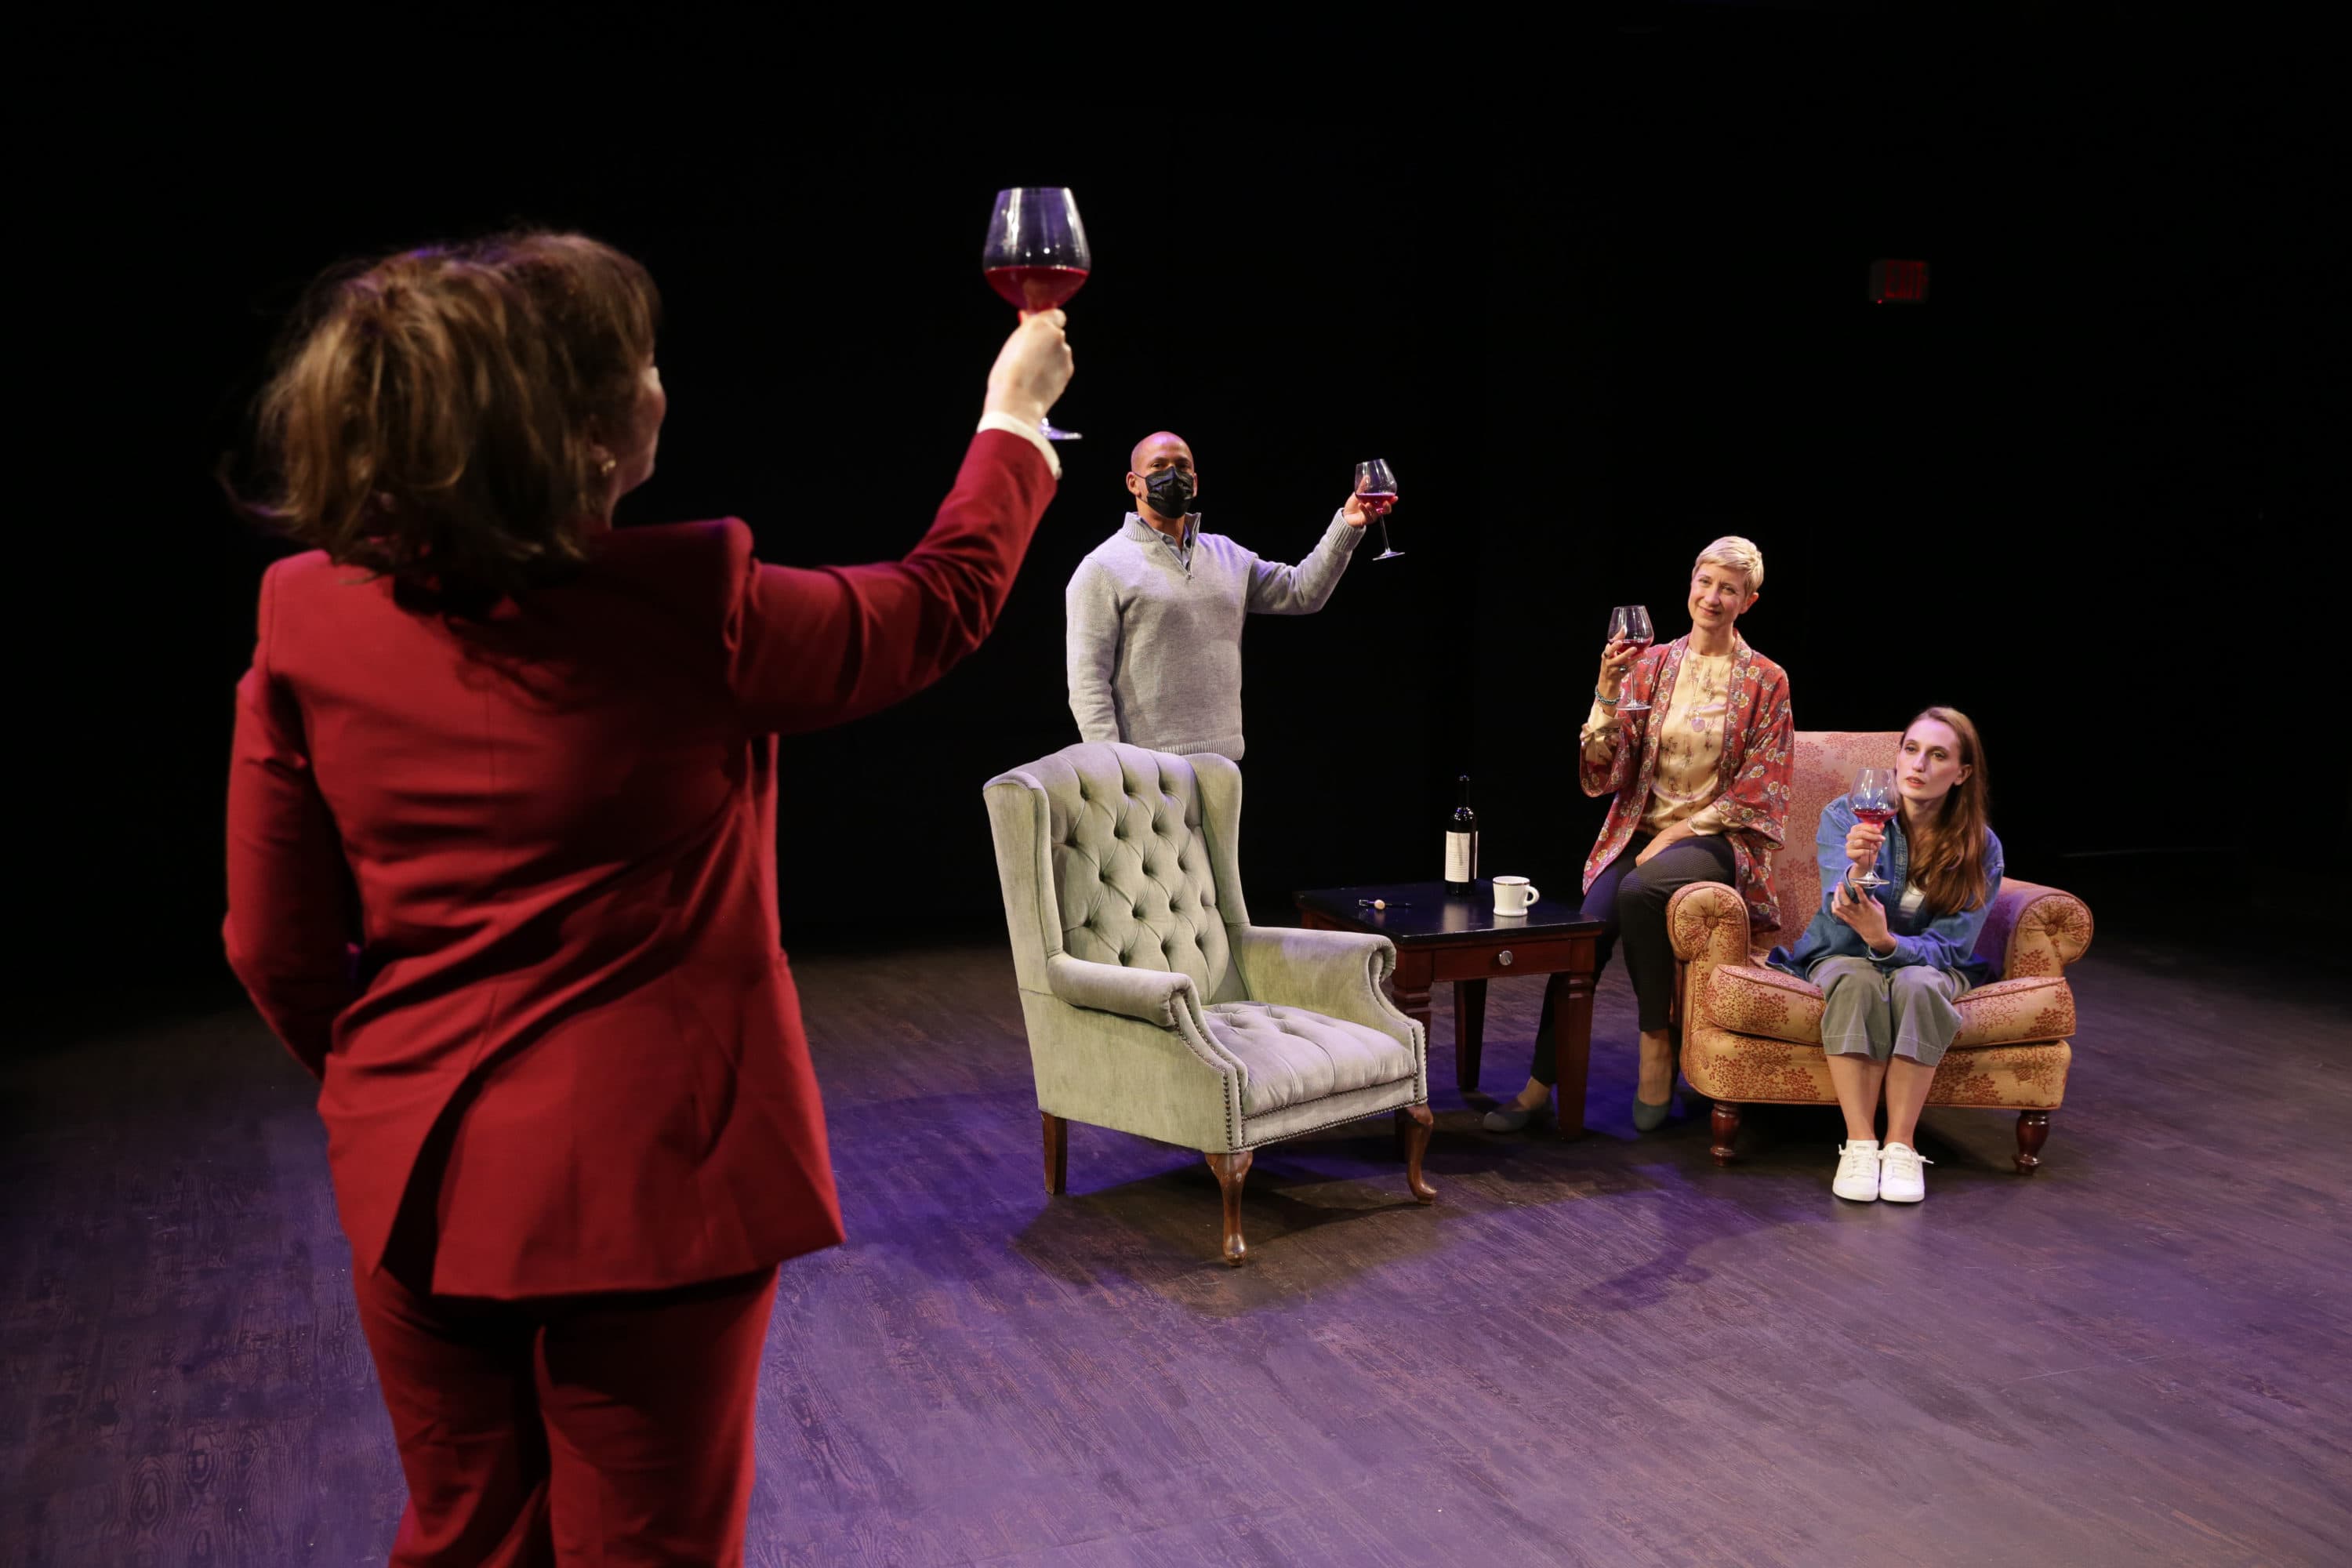 &quot;The Thin Place&quot; at Gloucester Stage Company runs through Oct. 23. From left to right: Bren McElroy as Sylvia, Joshua Wolf Coleman as Jerry, Cynthia Beckert as Sylvia and Siobhán Carroll as Hilda (Courtesy Jason Grow)